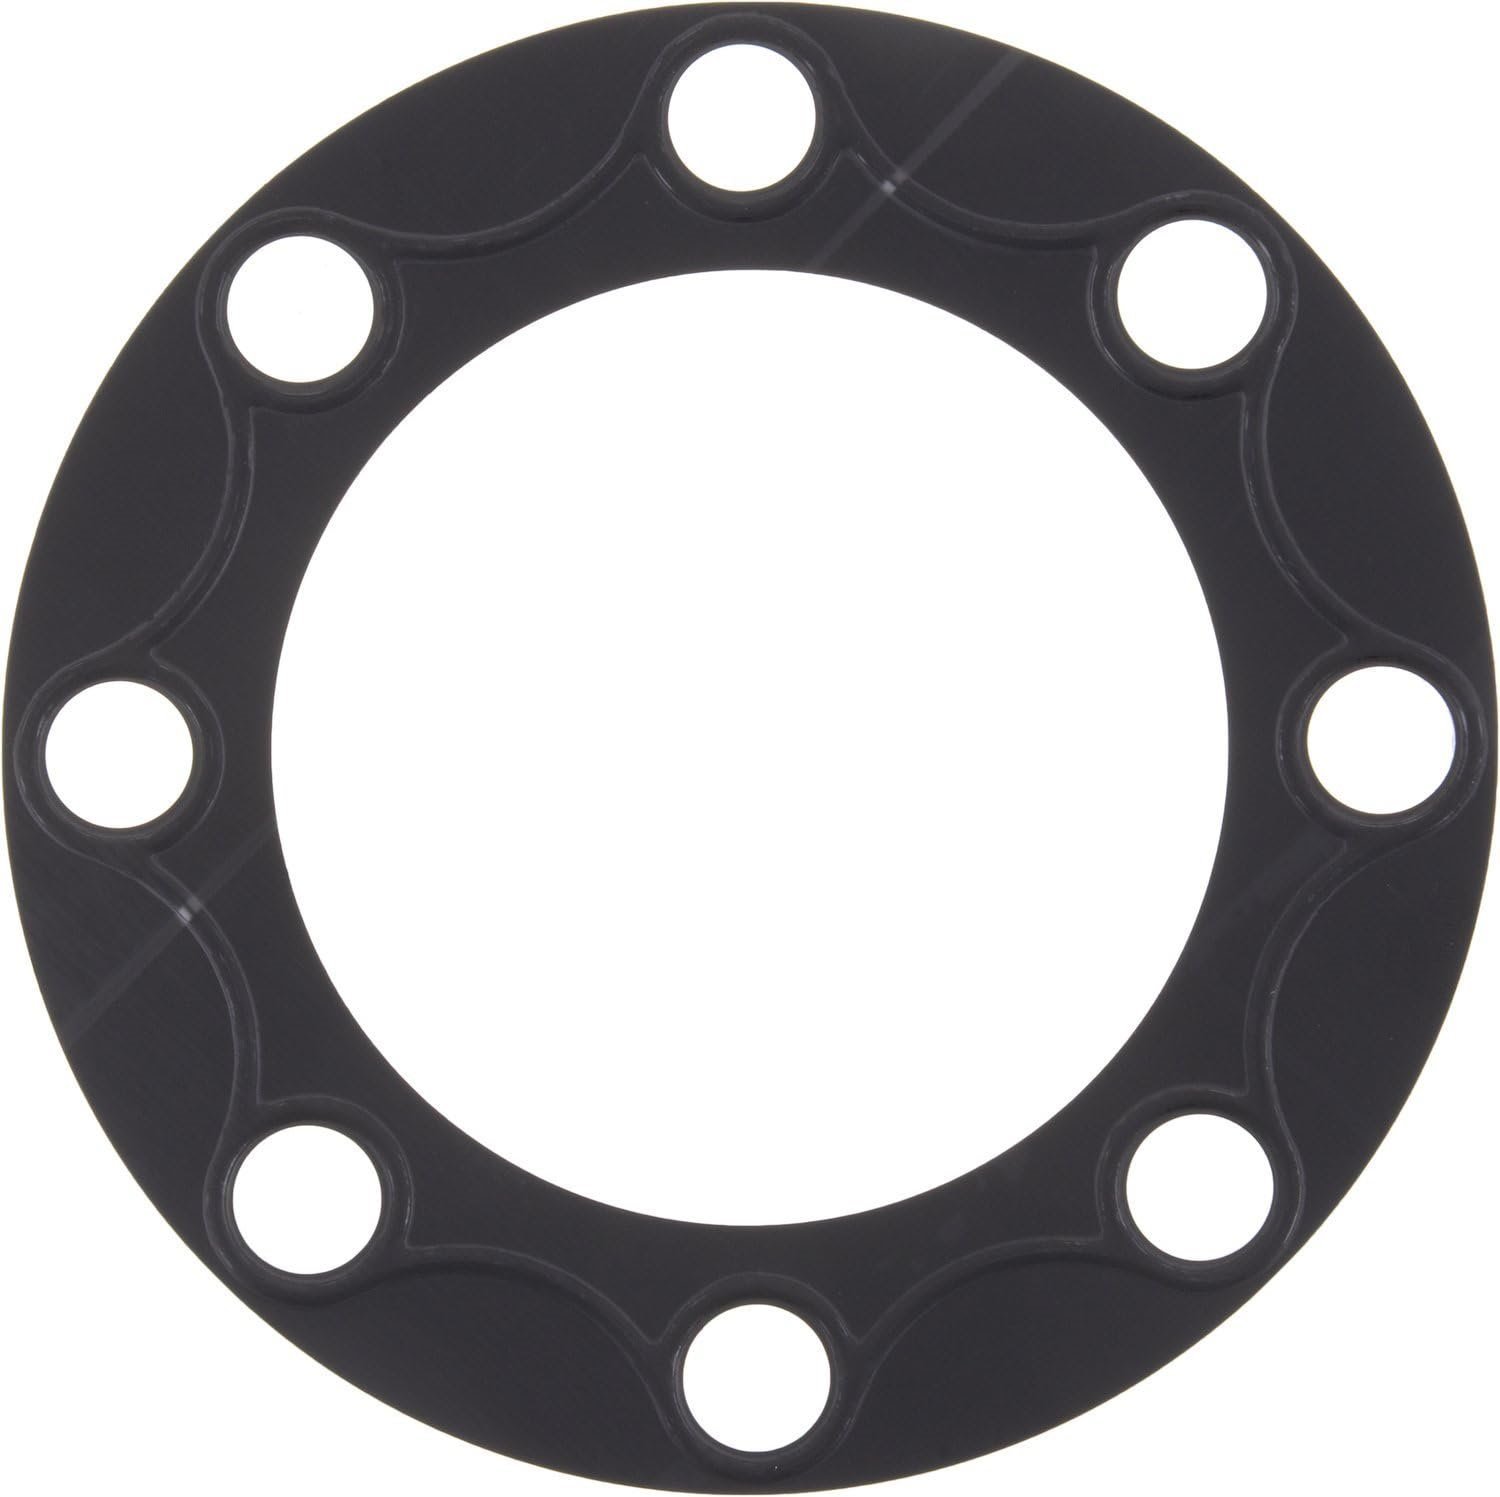 39697 Rear Axle Flange Gasket Fits Select 1975-2014 Dodge and Ford Models